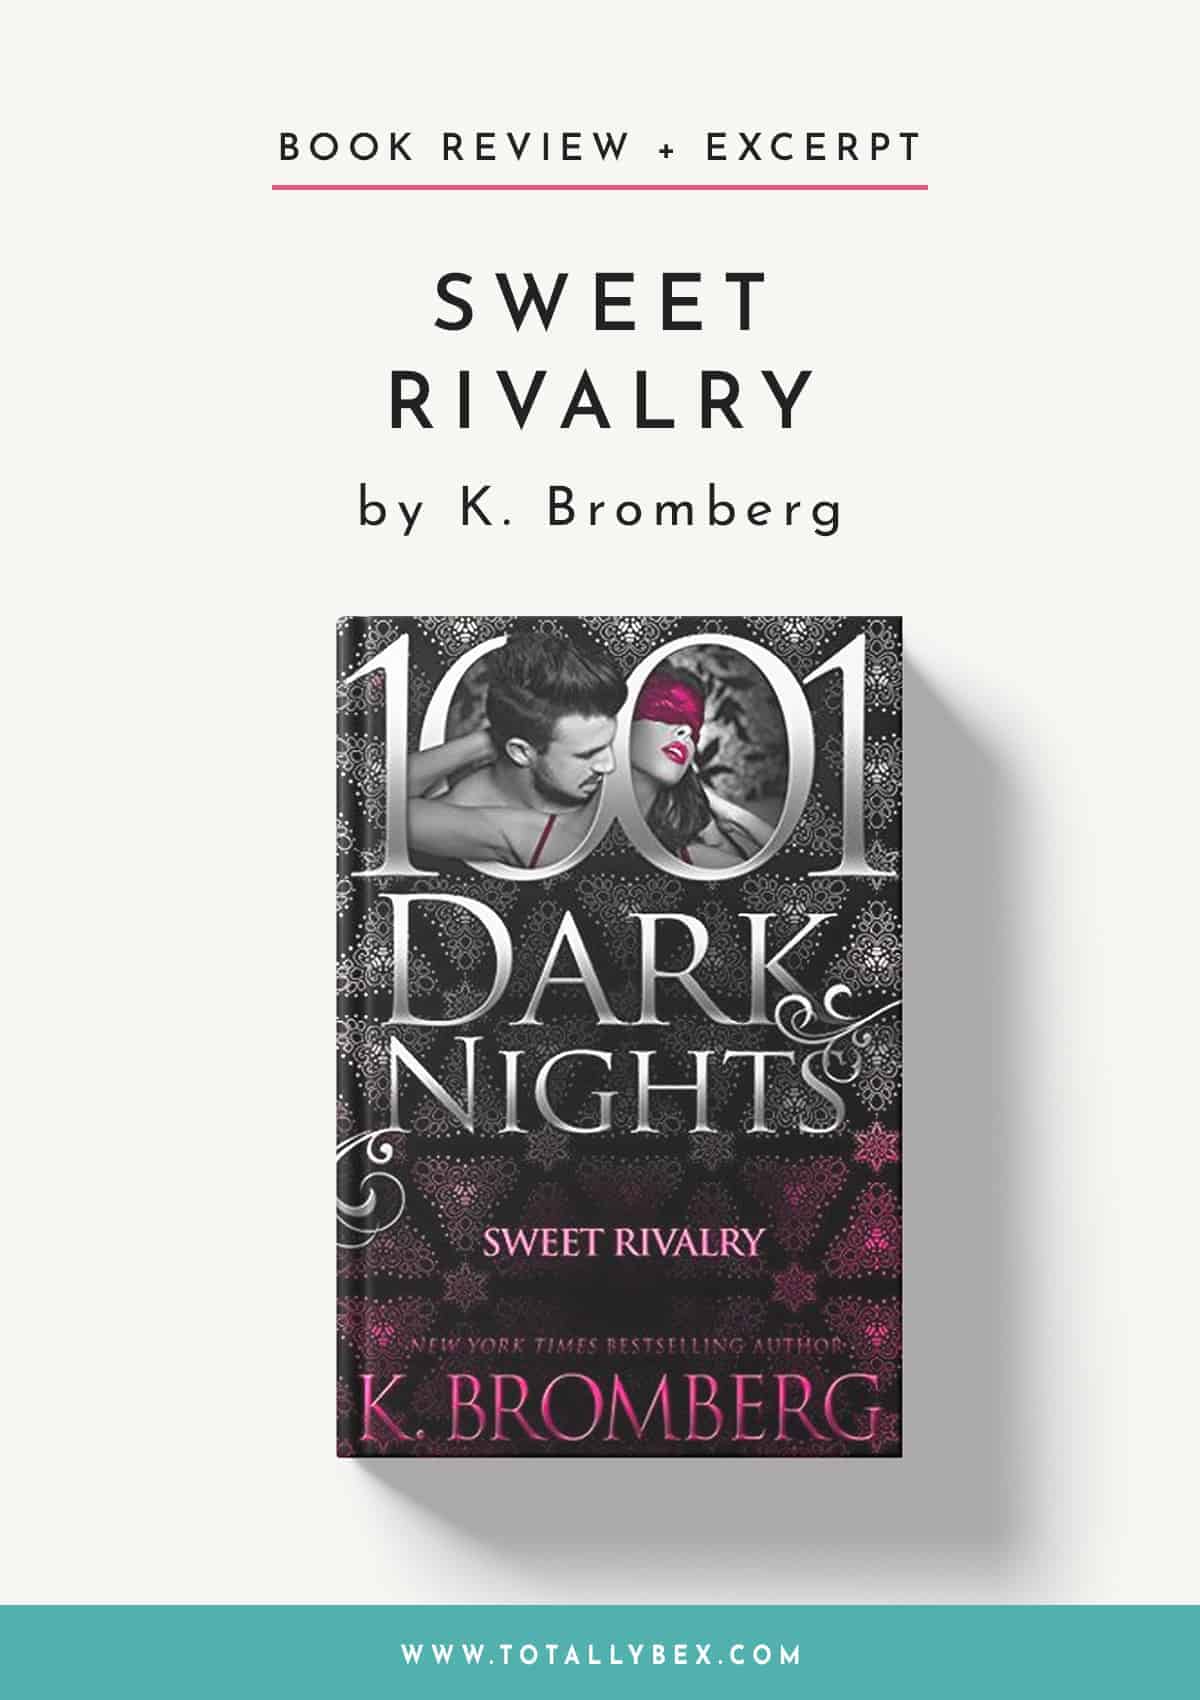 Sweet Rivalry by K Bromberg-Book Review+Excerpt